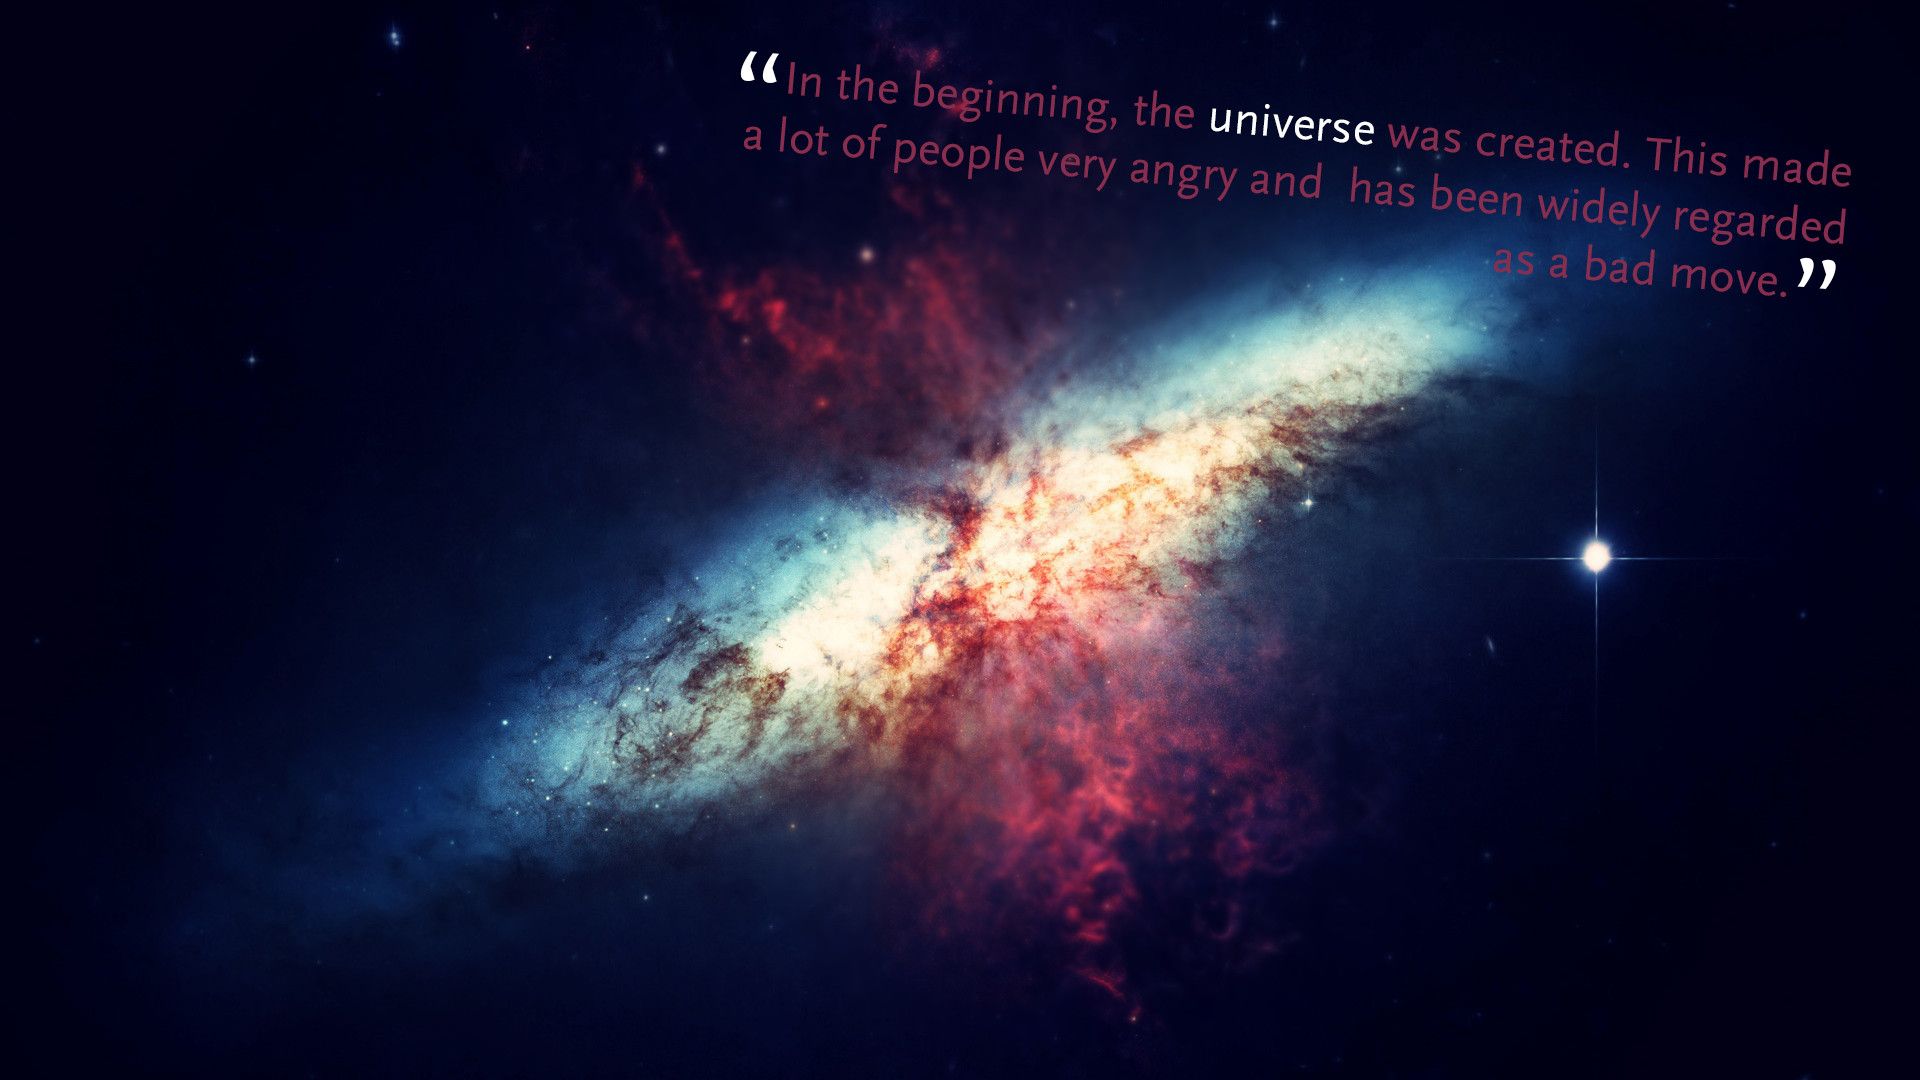 Hitchhiker's Guide to the Galaxy. Simple quote made in Photohop. [1920x1080]